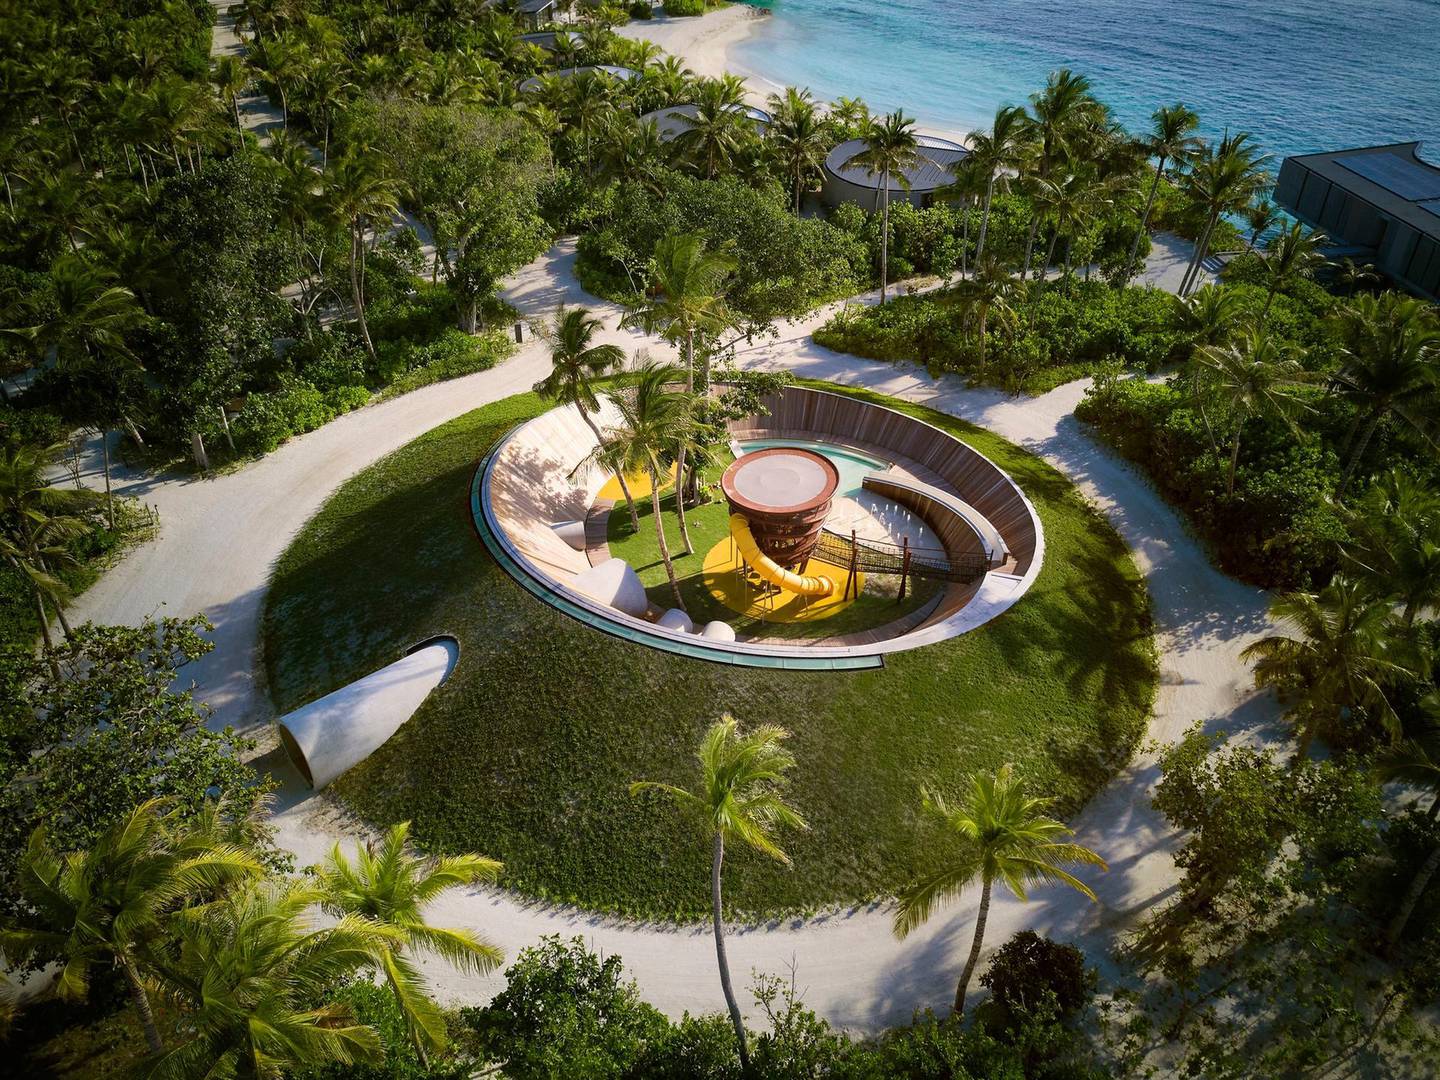 The Ritz-Carlton, Fari Islands has a minimalist design inspired by the swirling waters of the Indian Ocean. Courtesy Ritz-Carlton / Marriott